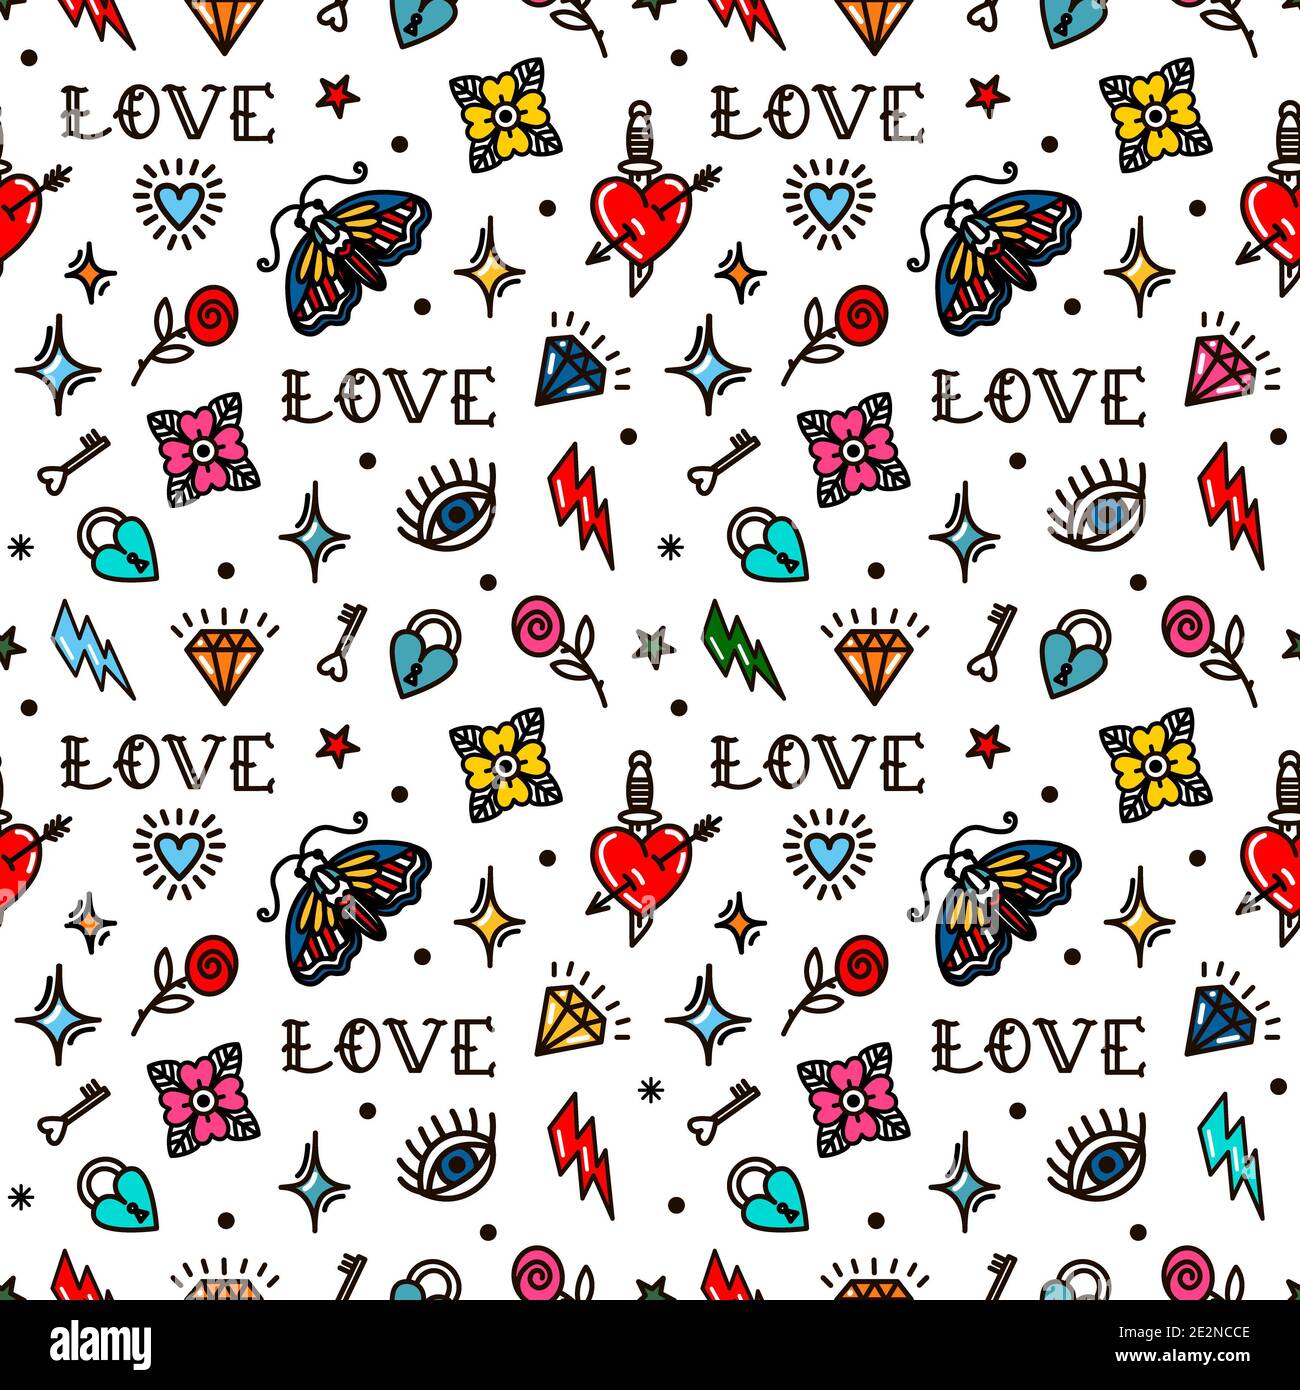 Old school tattoo seamless pattern with love symbols Design For Valentines  Day Stock Photo  Alamy